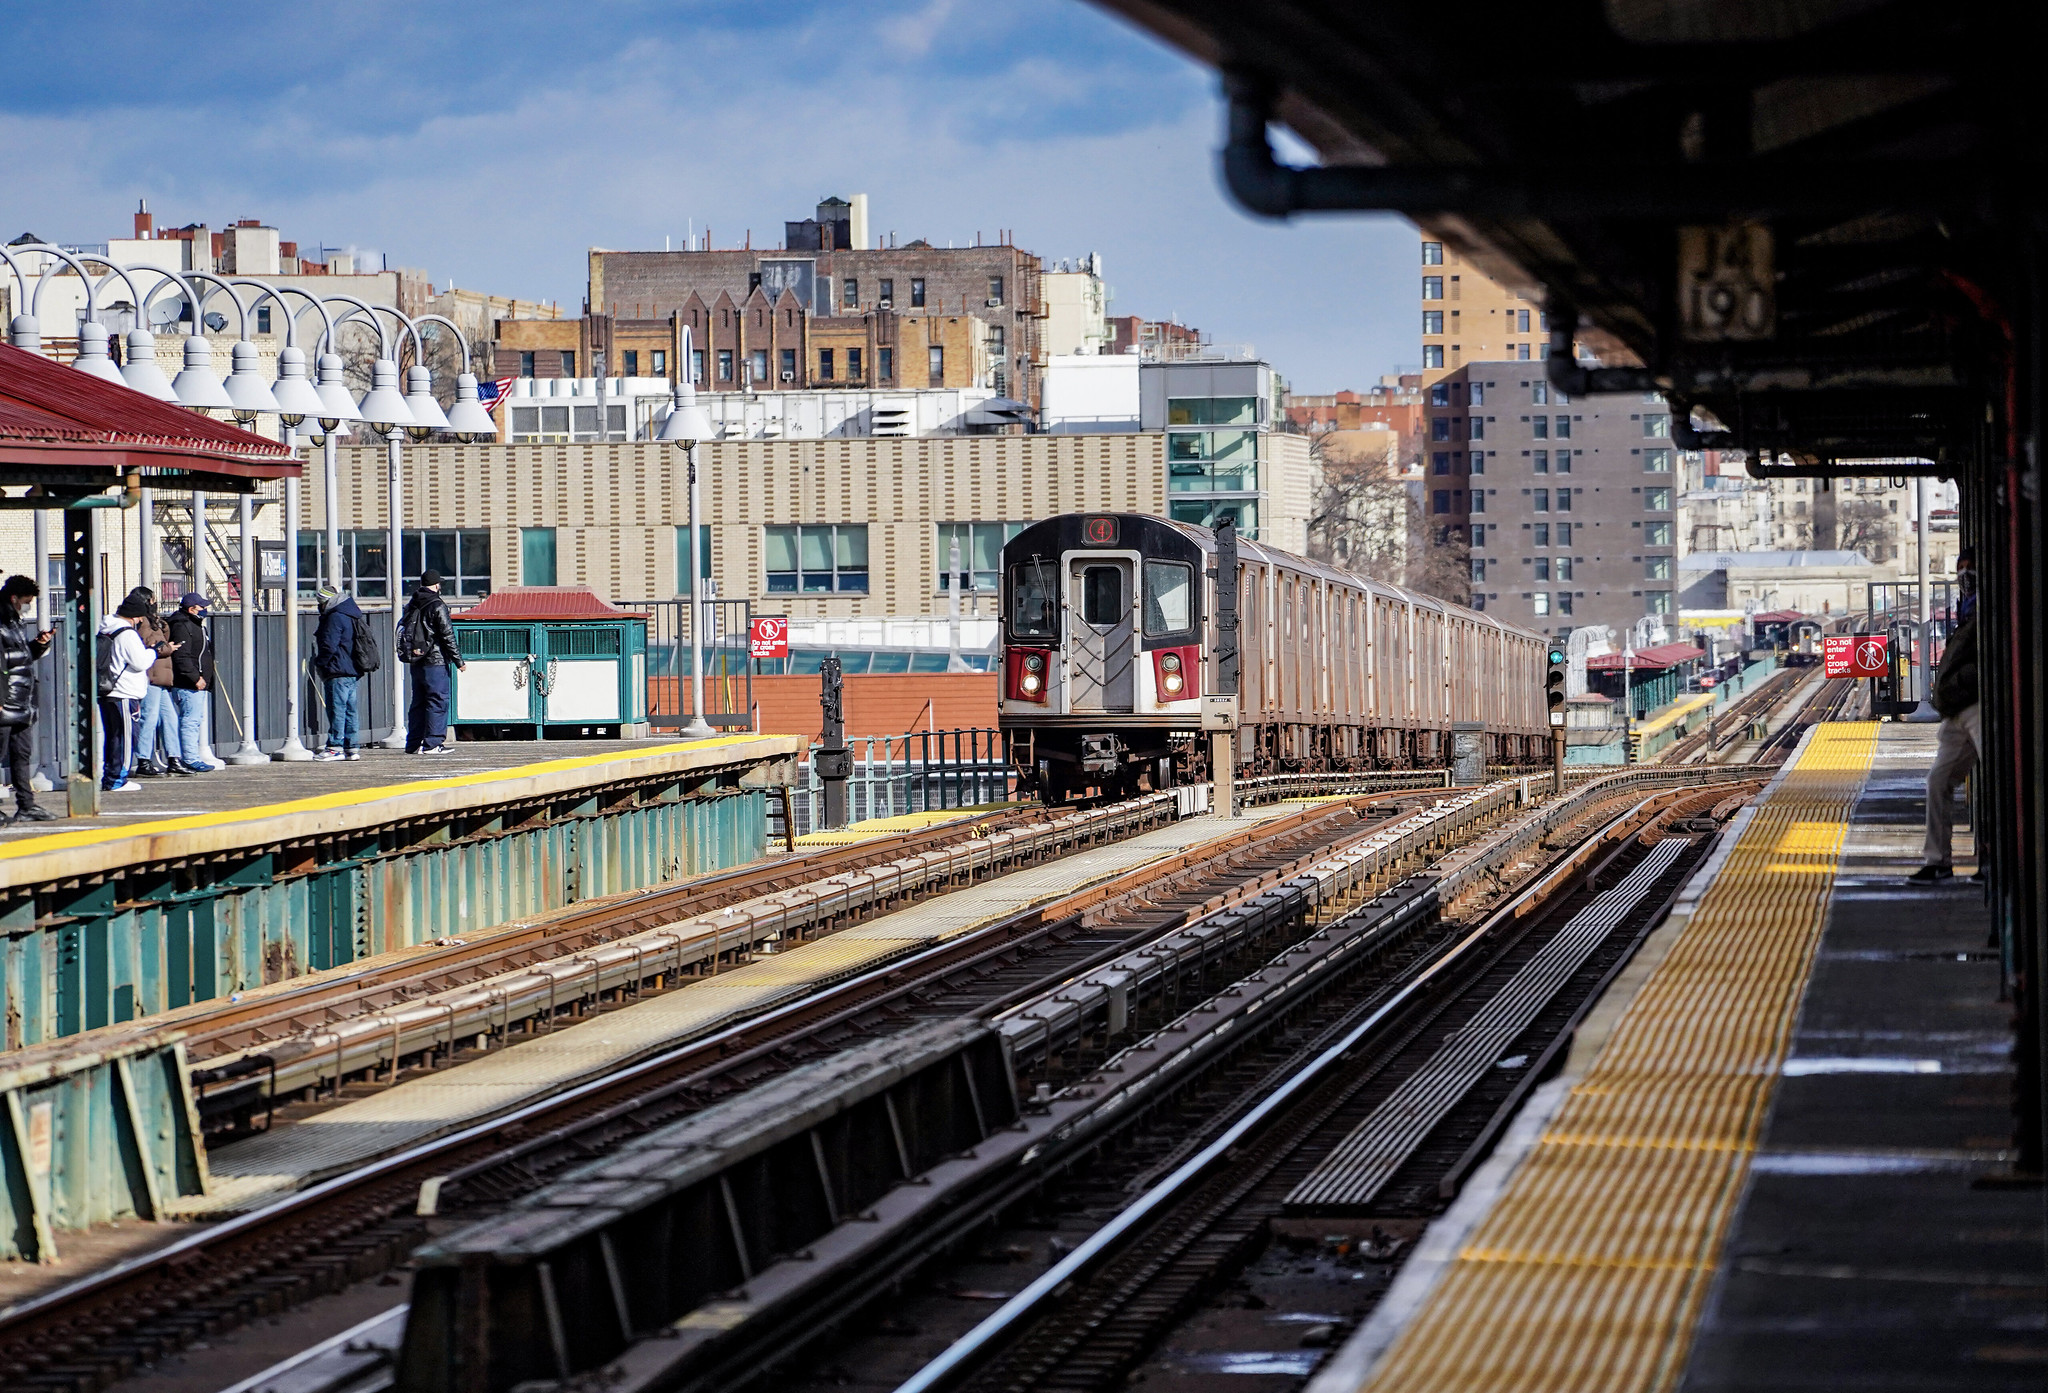 A train arrives at the East 170 St station on the Jerome Av 4 line.